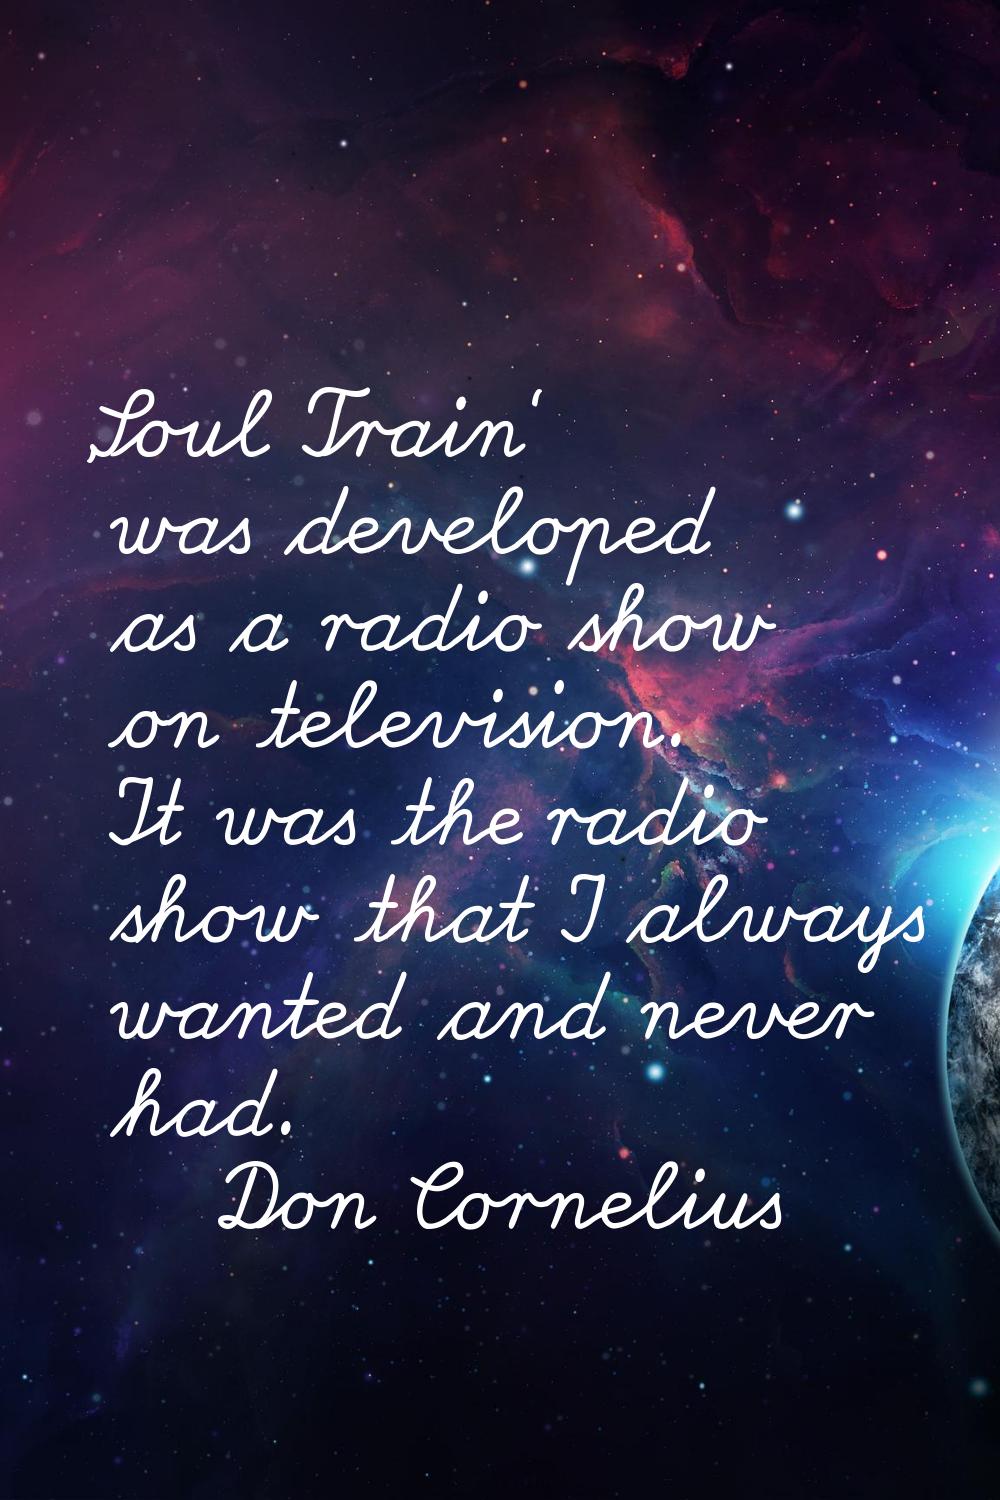 'Soul Train' was developed as a radio show on television. It was the radio show that I always wante